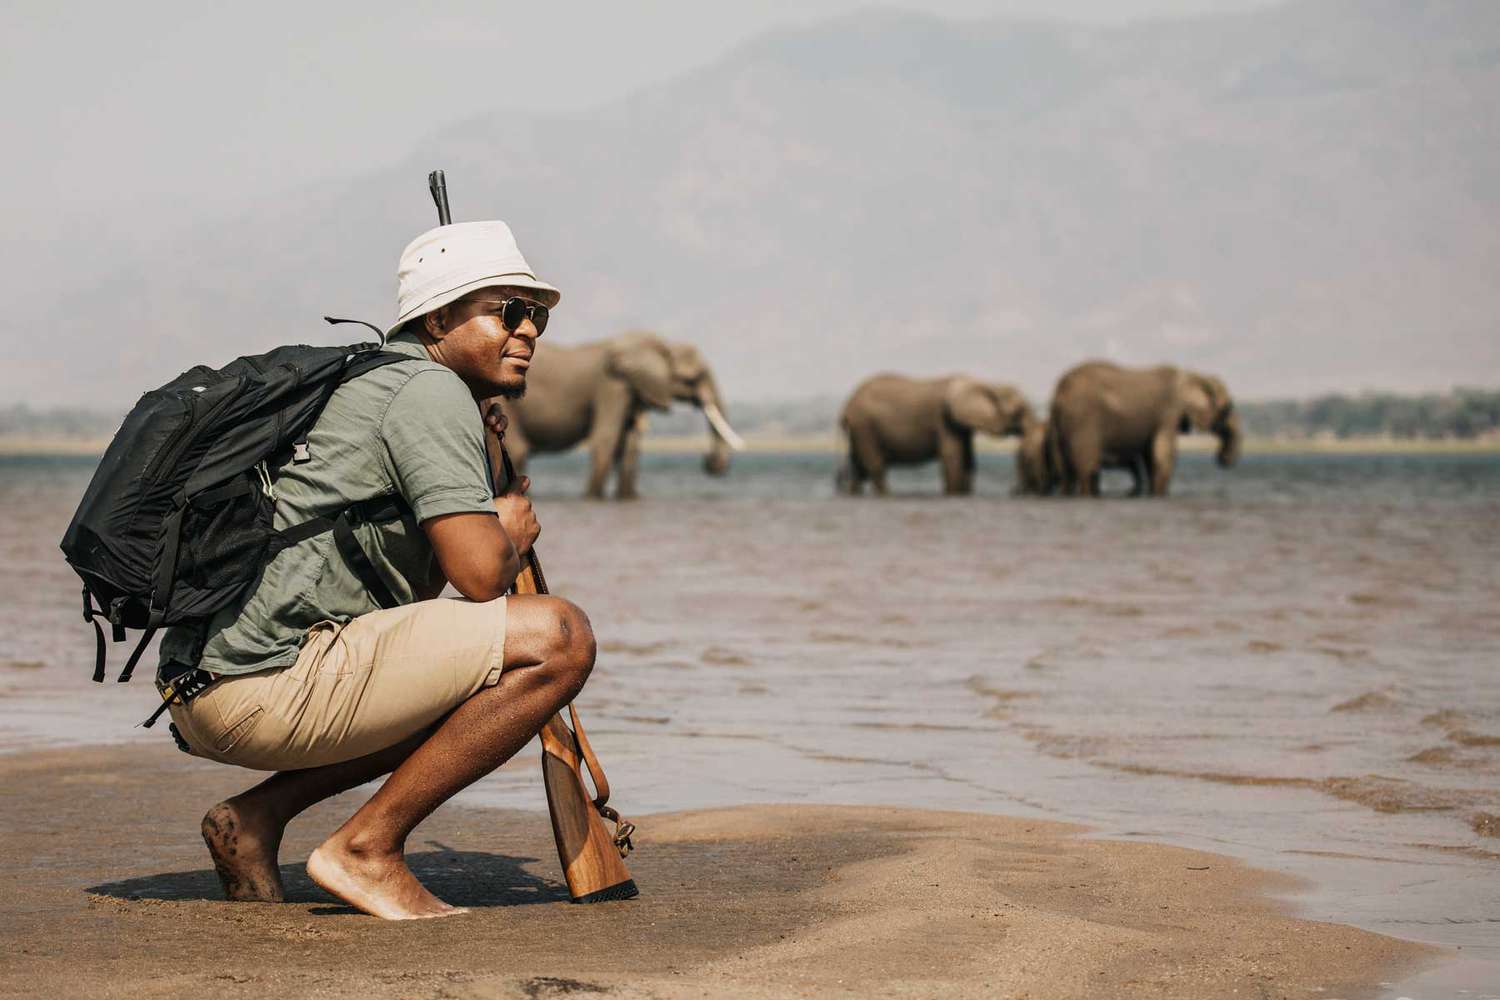 A New Vision for Safaris: One That Puts African Stories First